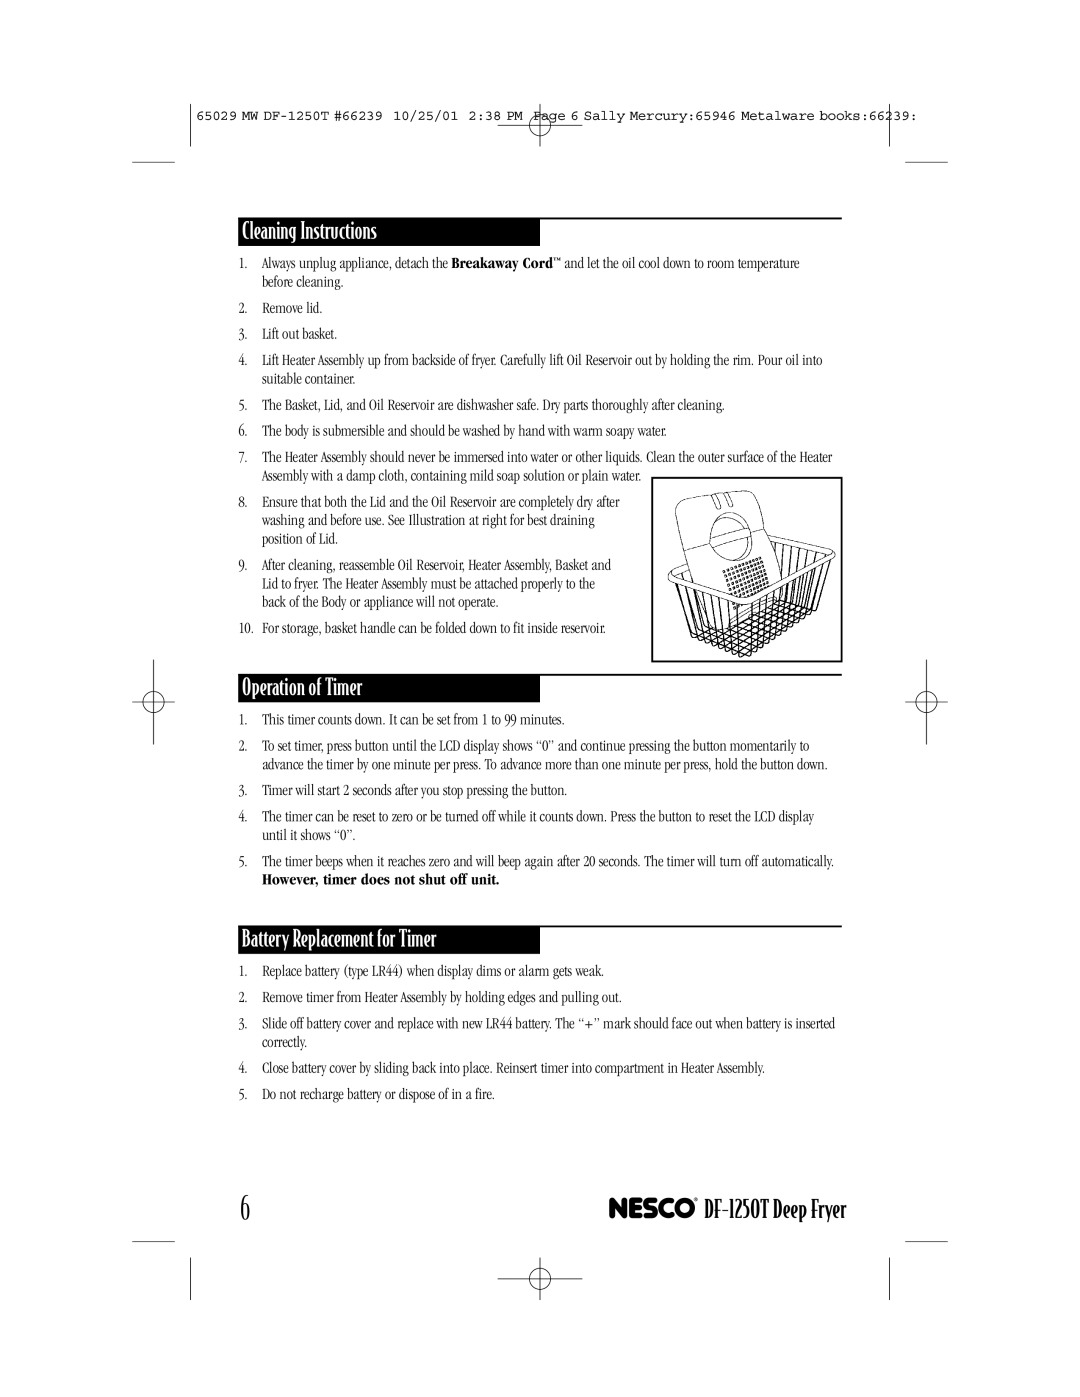 Nesco DF-1250T manual Cleaning Instructions, Operation of Timer, Battery Replacement for Timer 